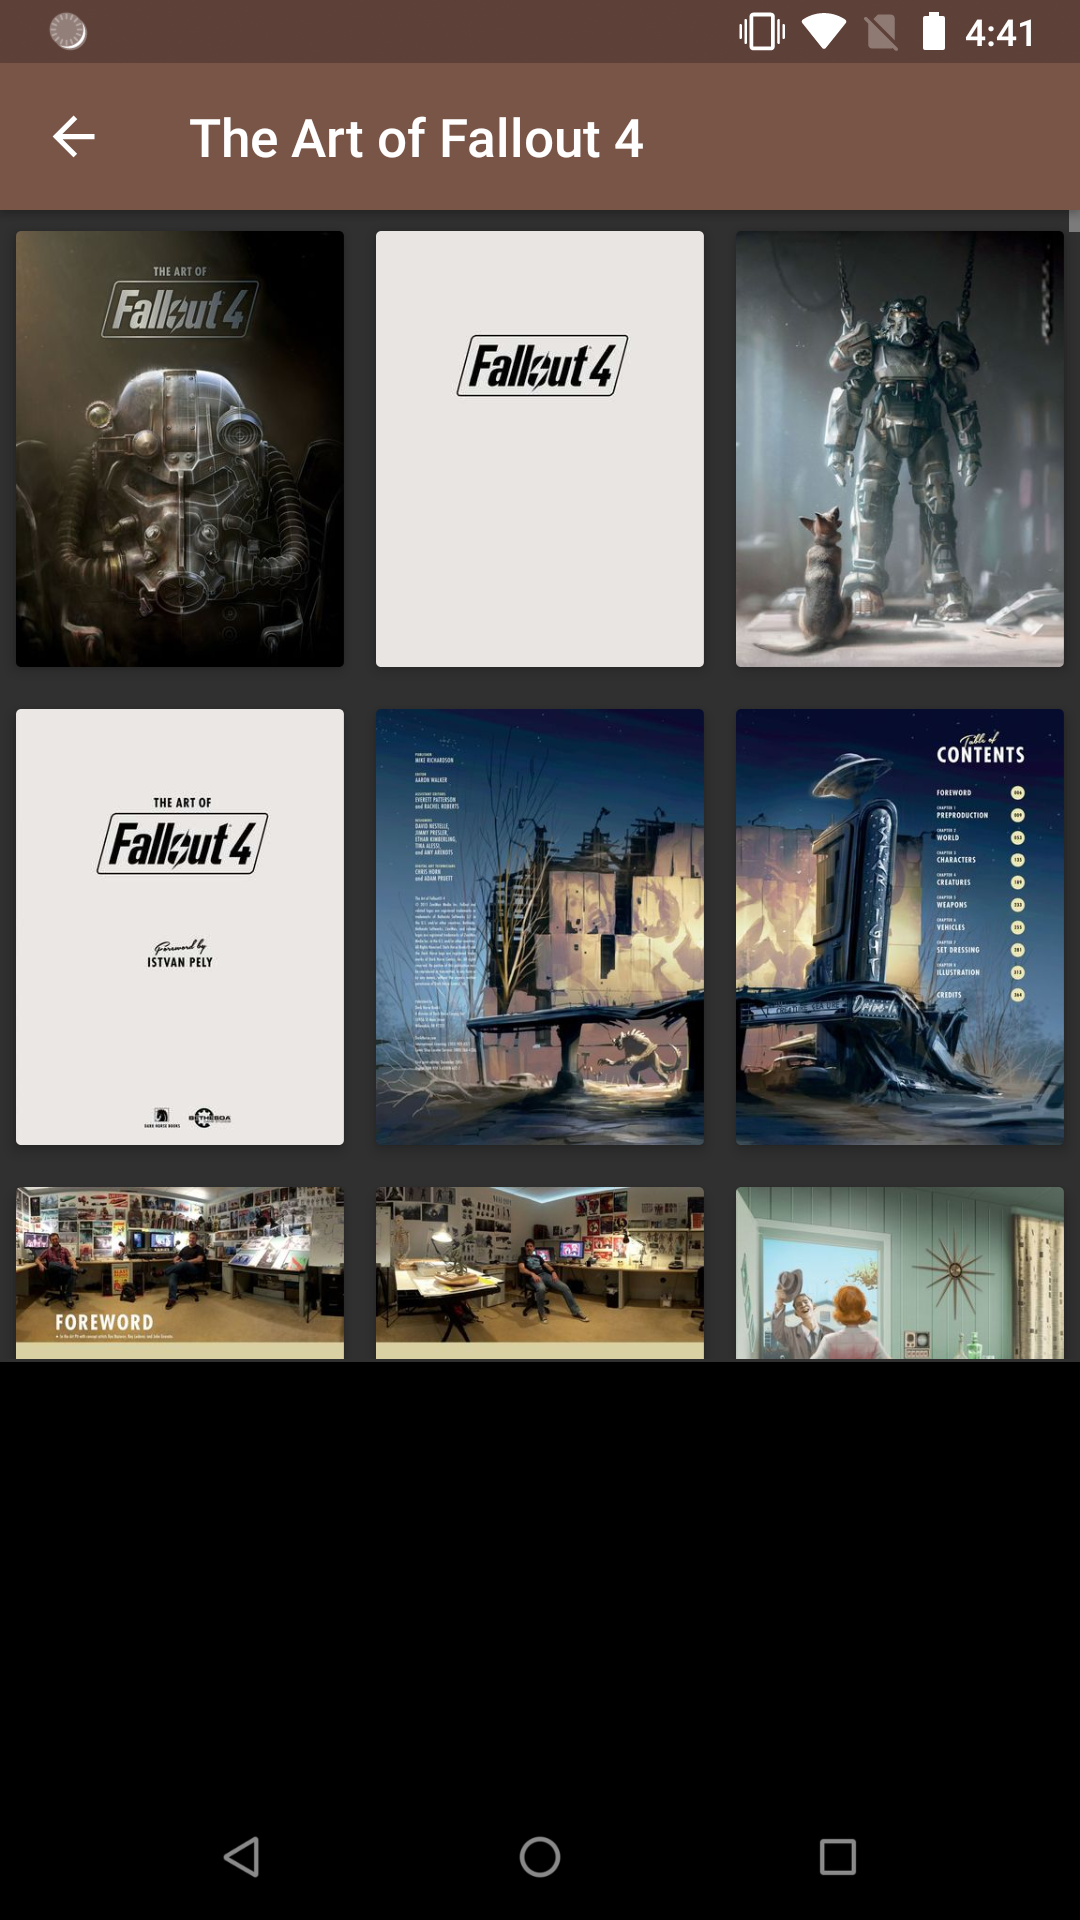 Fallout Artbook anal,lair,porn,gallery,for,adultwallpapers,fuck,apk,game,hentai,screensaver,anime,comics,erotic,kristinf,stockings,hantai,yuri,feast,mythras,latex,sexy,apps,femdom,demonic,pron,strapon,android